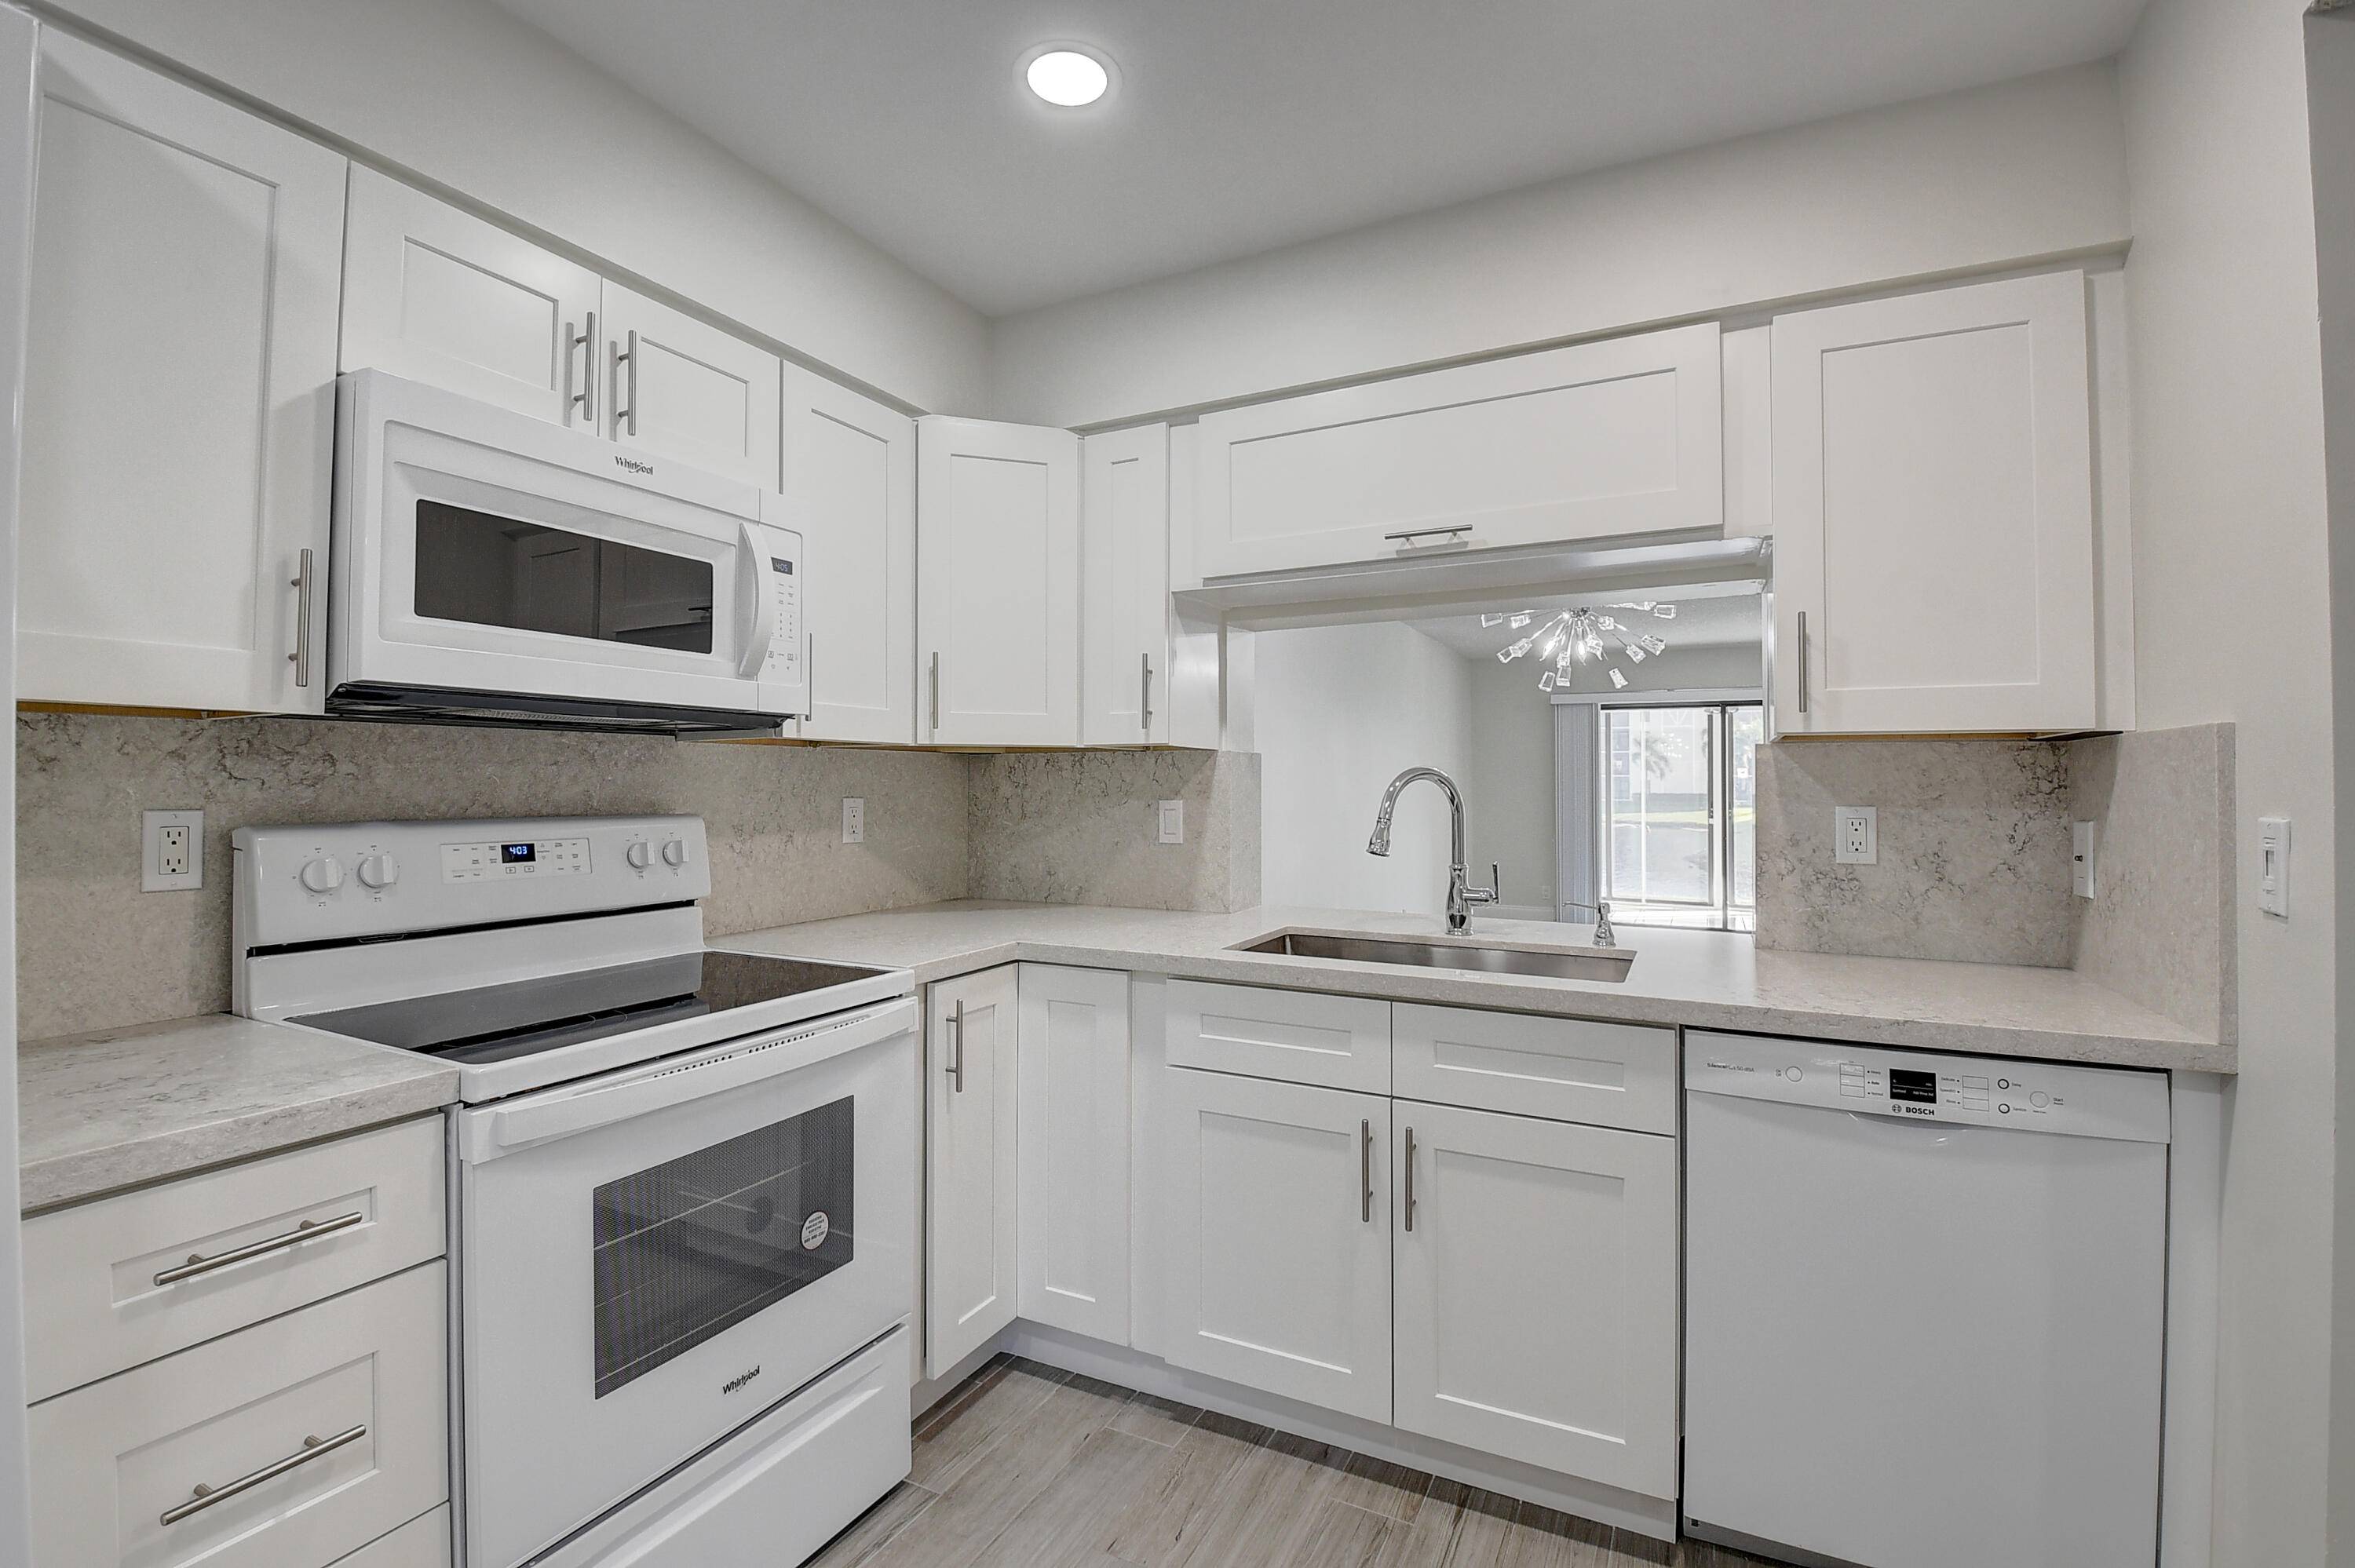 Welcome to this meticulously renovated, vacant, first floor condo waiting for you to make it your home with your parking spot directly in front of your unit.